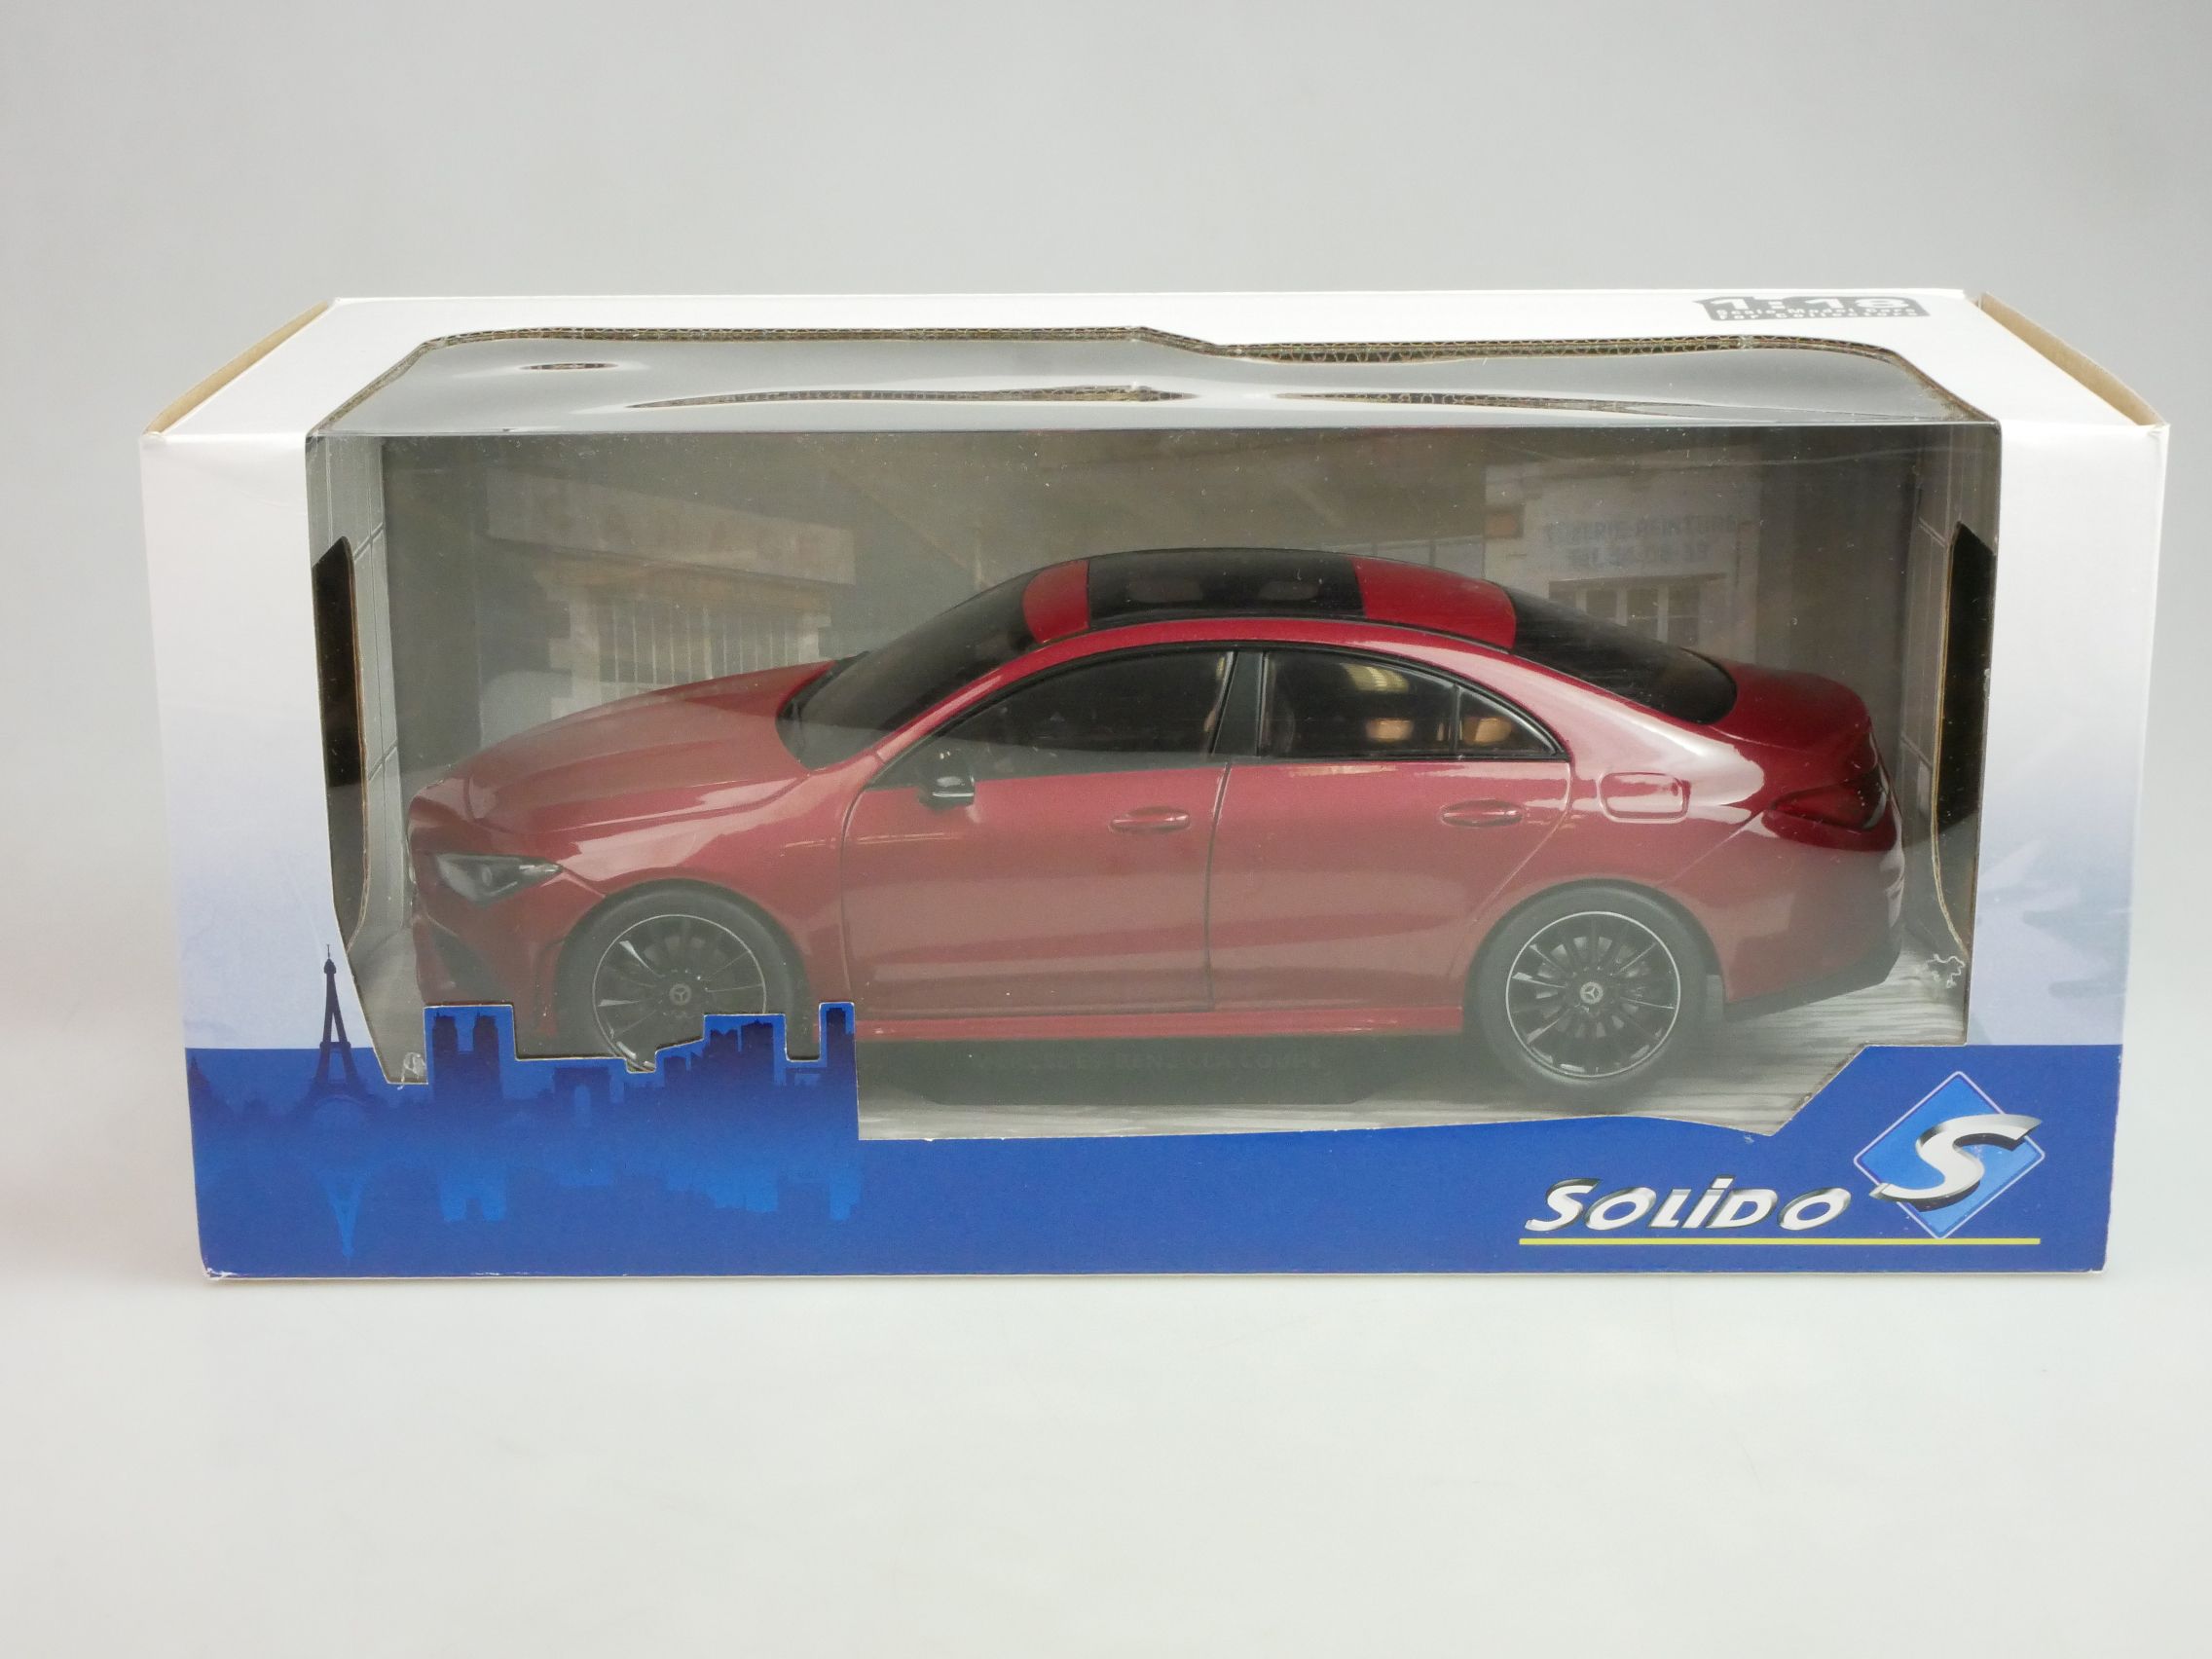 Solido 1/18 Mercedes Benz CLA Coupe C118 AMG diecast S1803104 + Box 125588